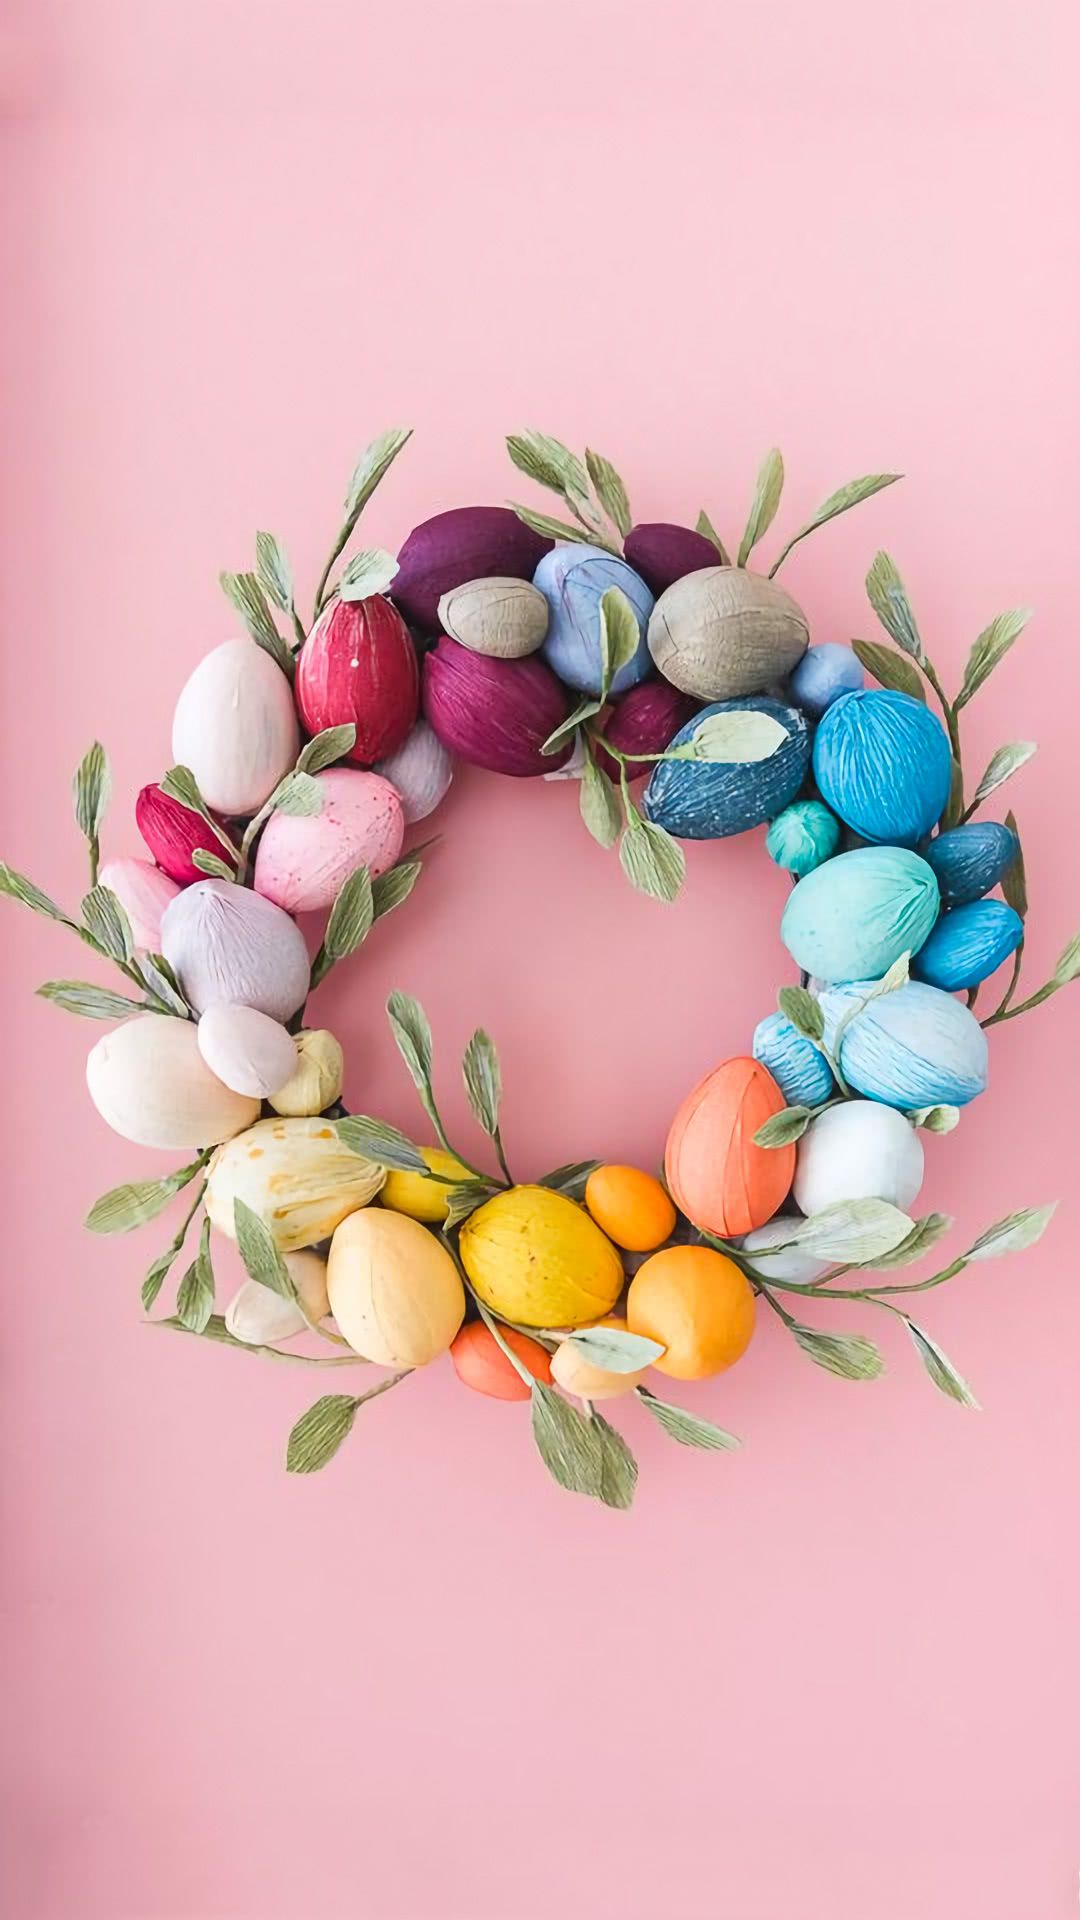 Easter wreath made of painted eggs and green leaves on a pink background - Easter